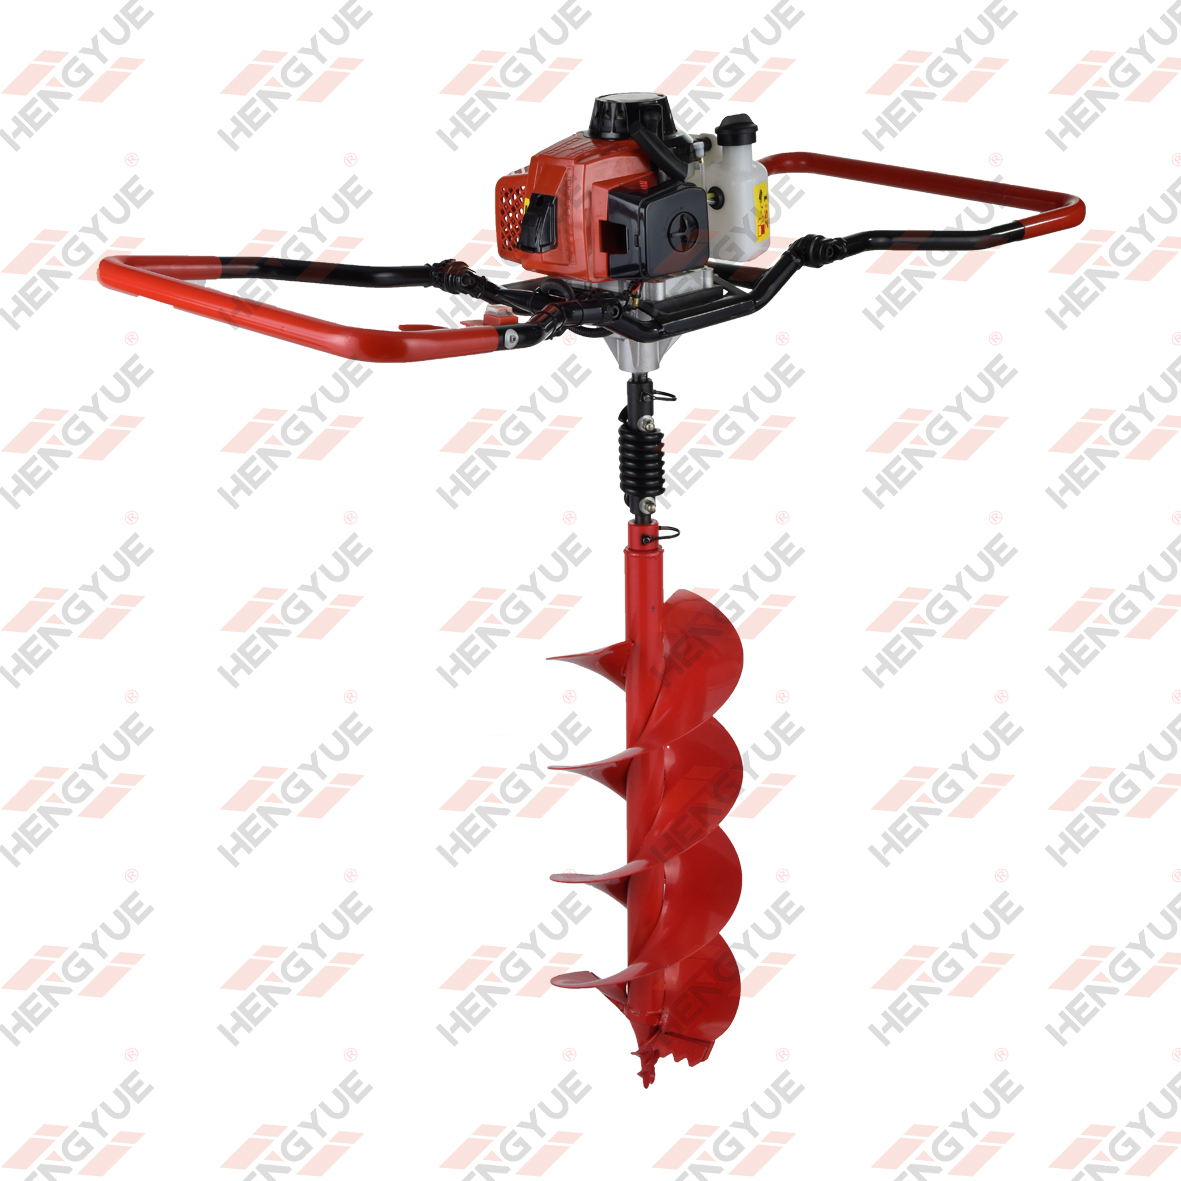 Powered by HONDA GX50 Foldable Handle Design Earth Auger Machine